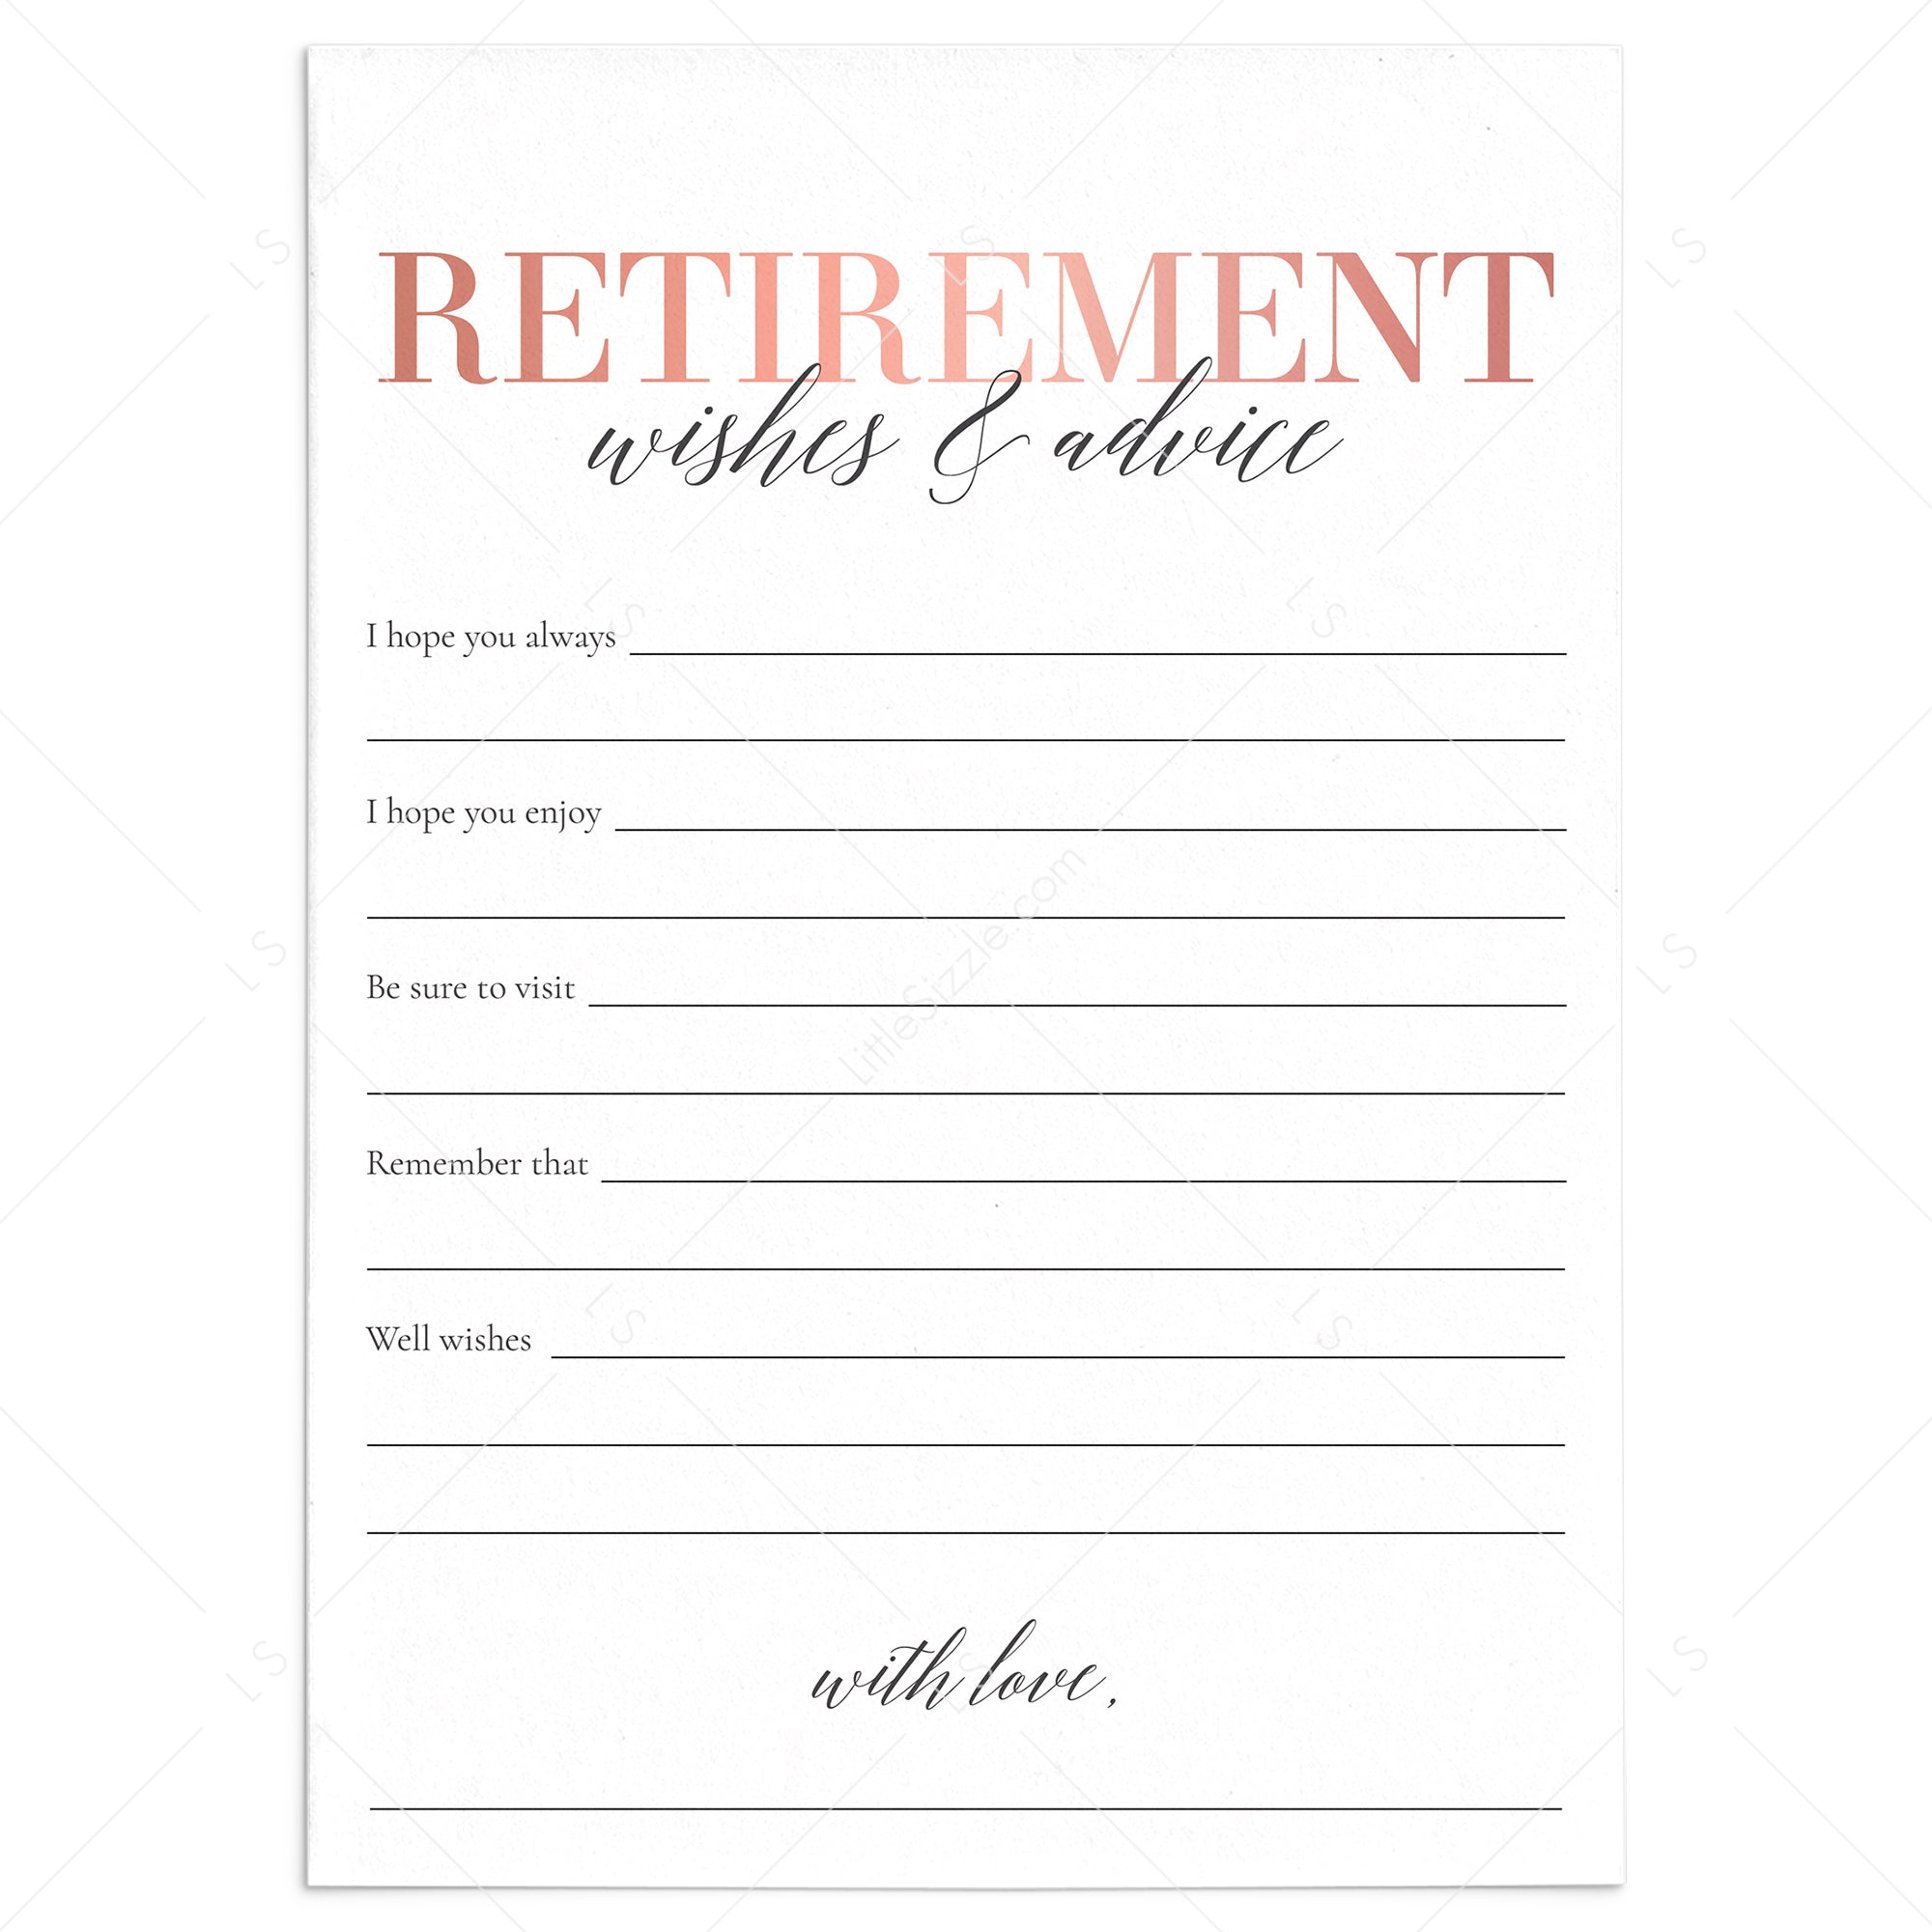 Women's Retirement Wishes and Advice Cards Printable by LittleSizzle